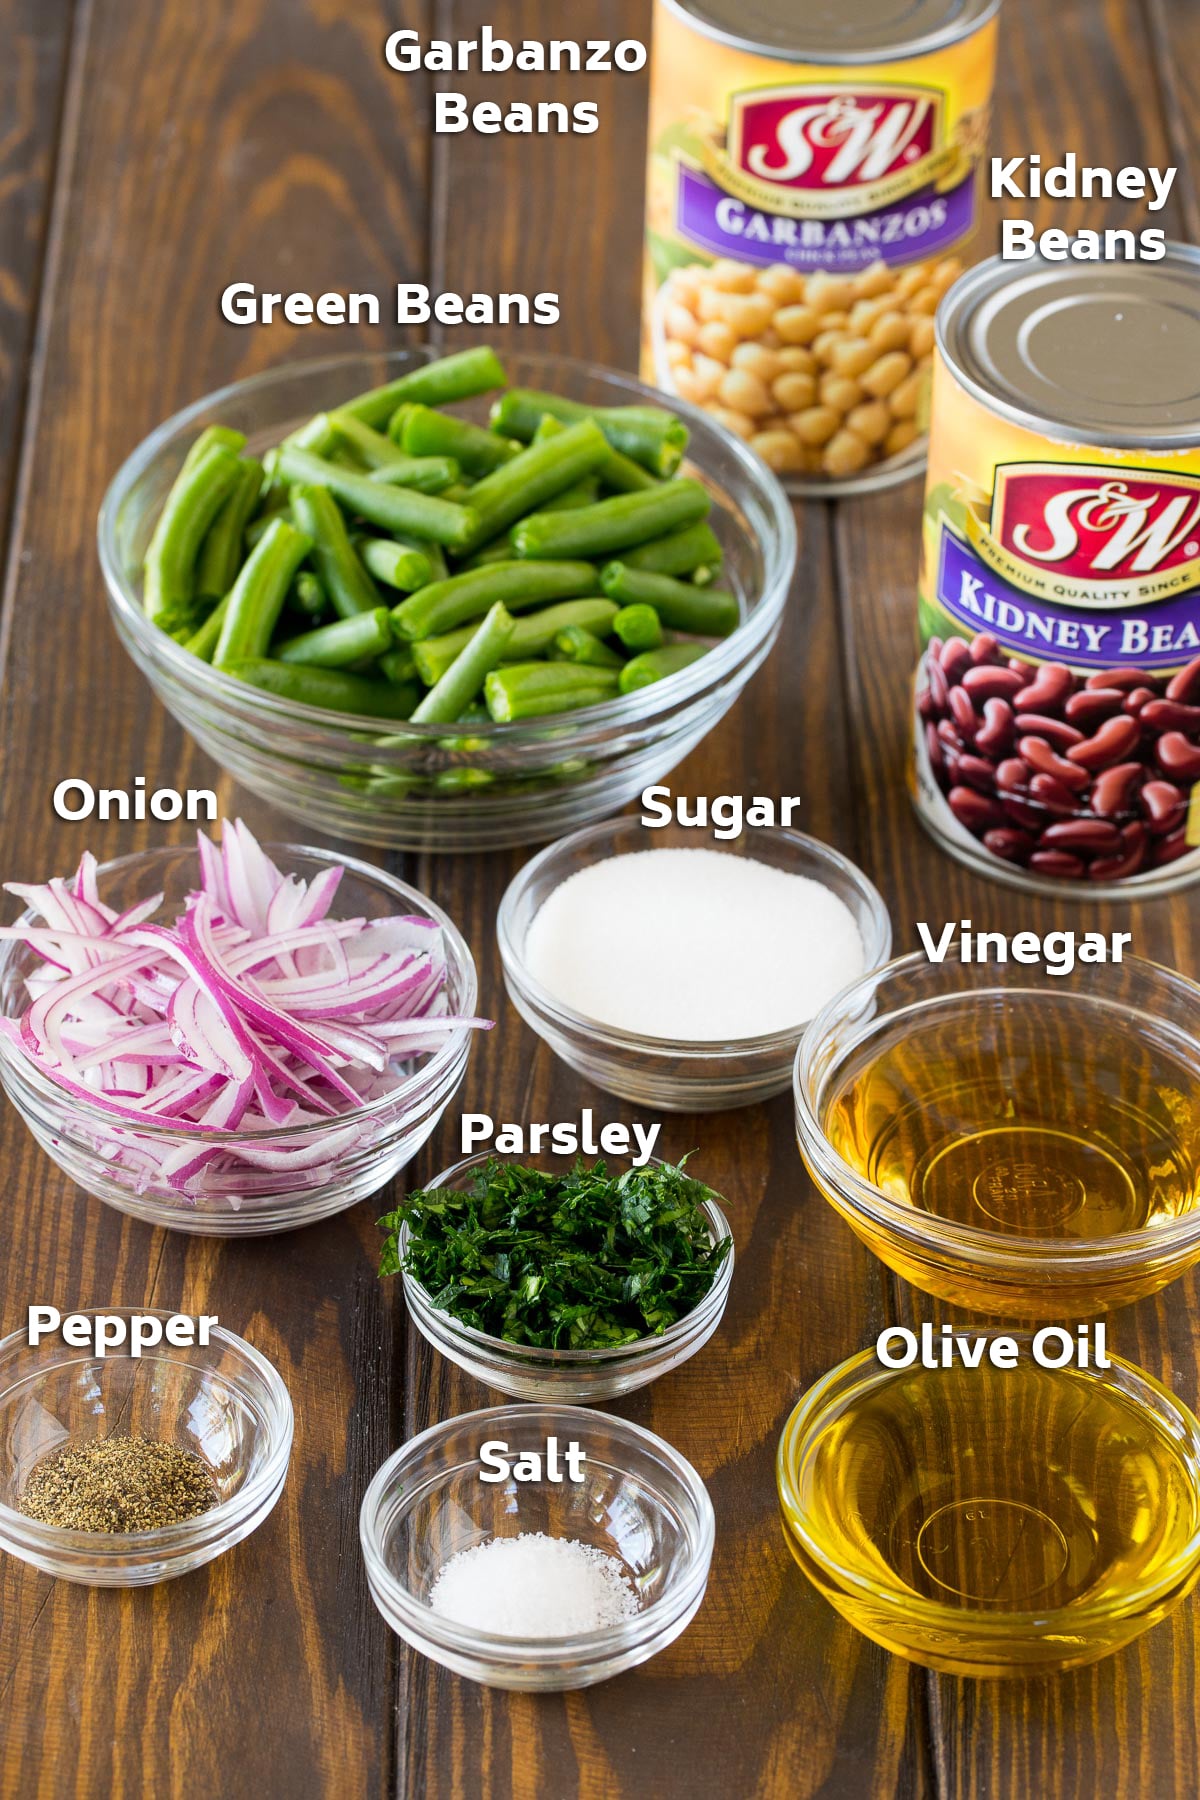 Ingredients including canned and fresh beans, olive oil, vinegar and seasonings.